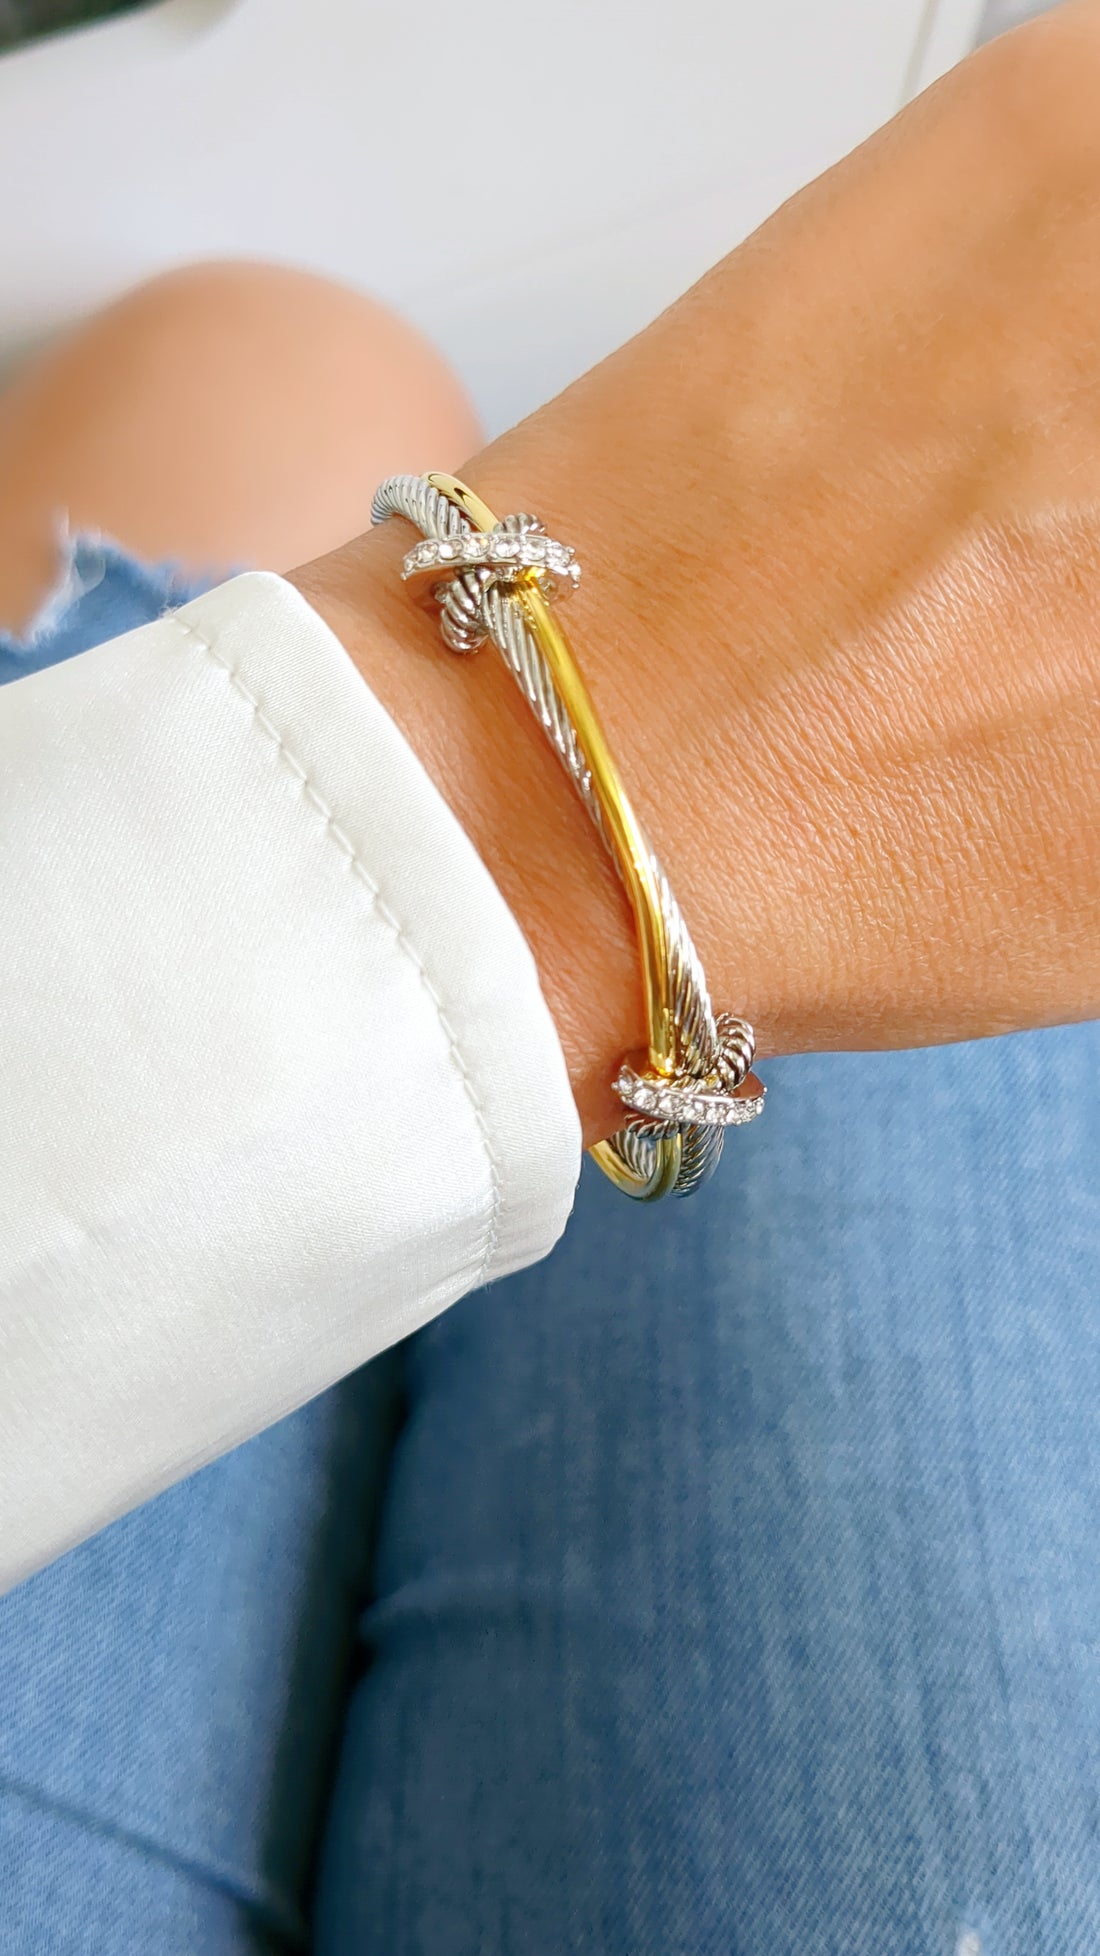 Two Tone Double X Bangle Bracelet with Simulated Diamonds Accents